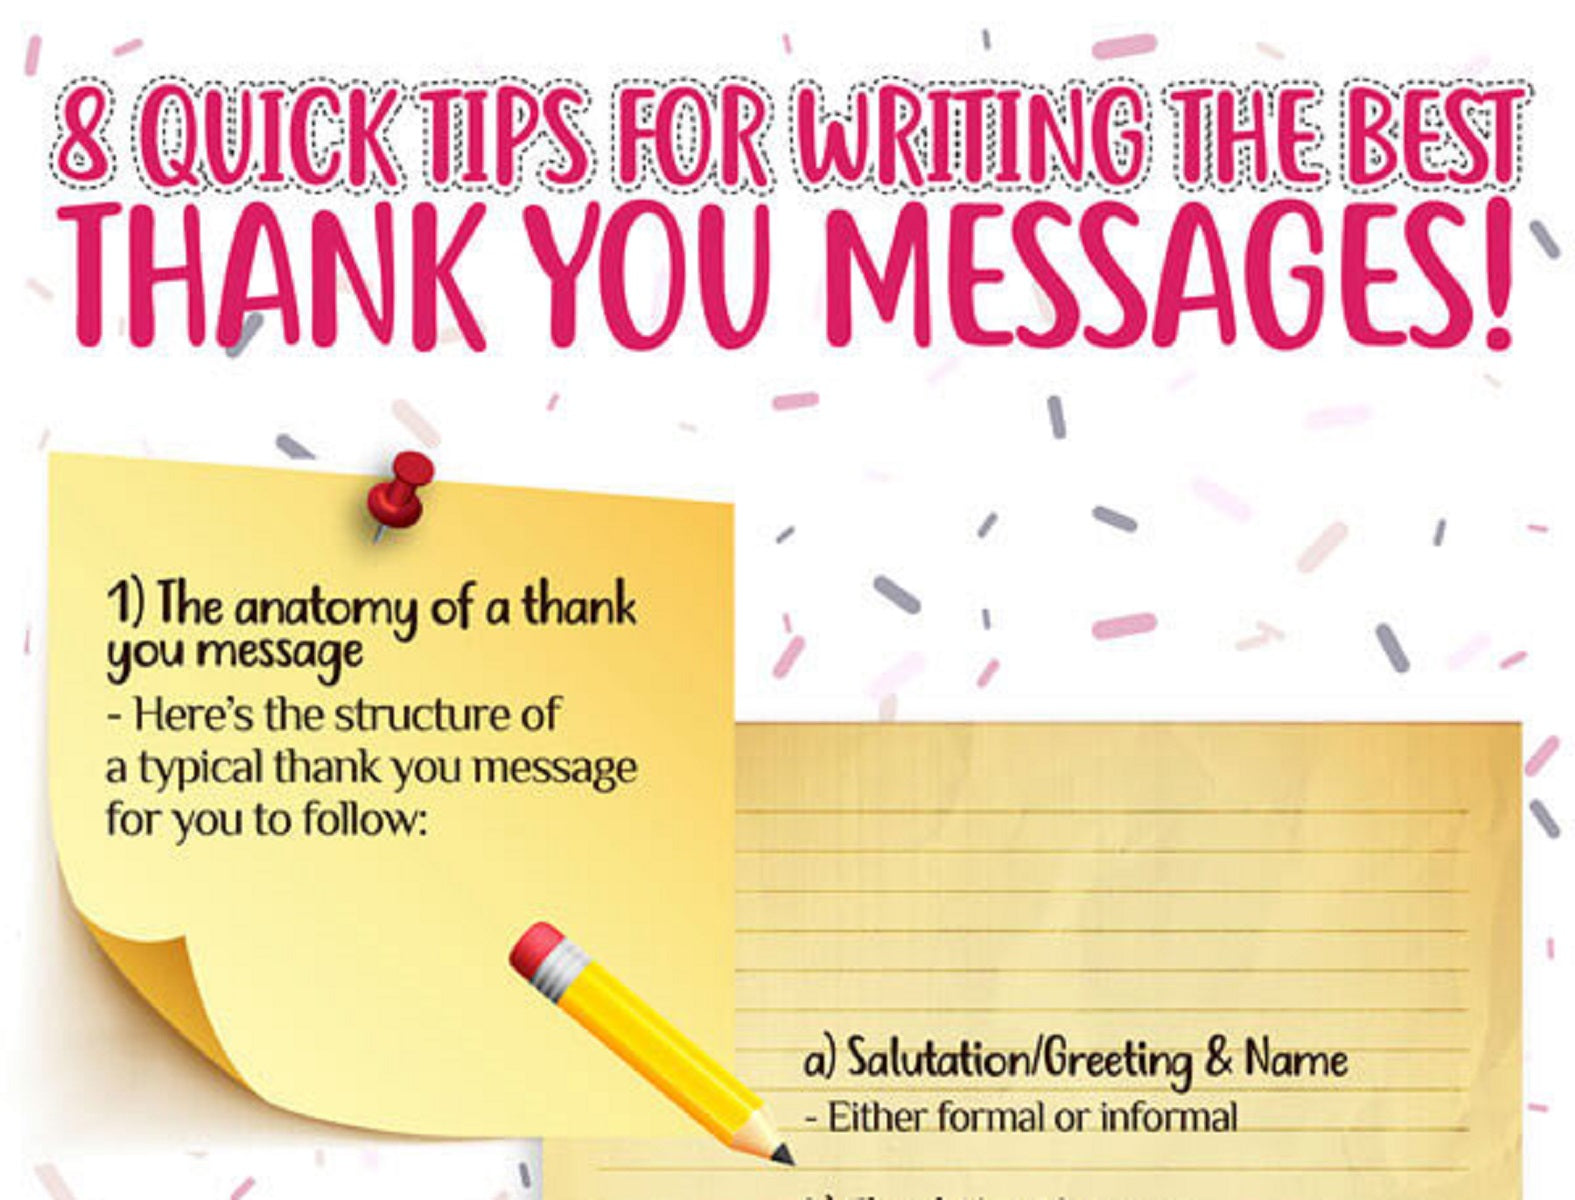 8 quick tips for writing the best thank you messages